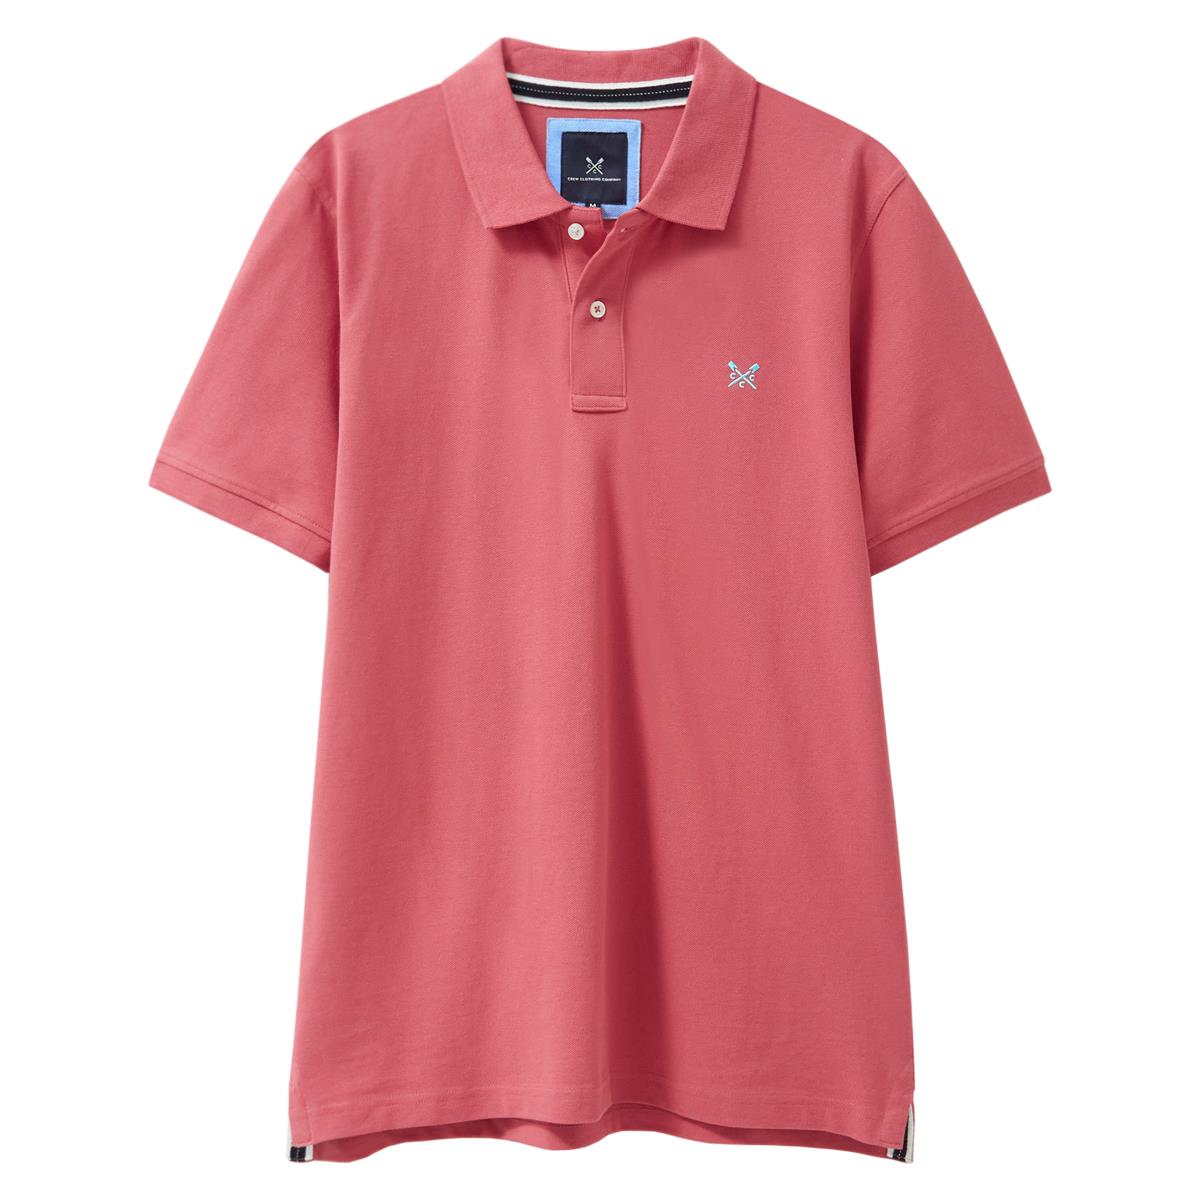 What are the characteristics of Crew Clothing's pique polo shirts?